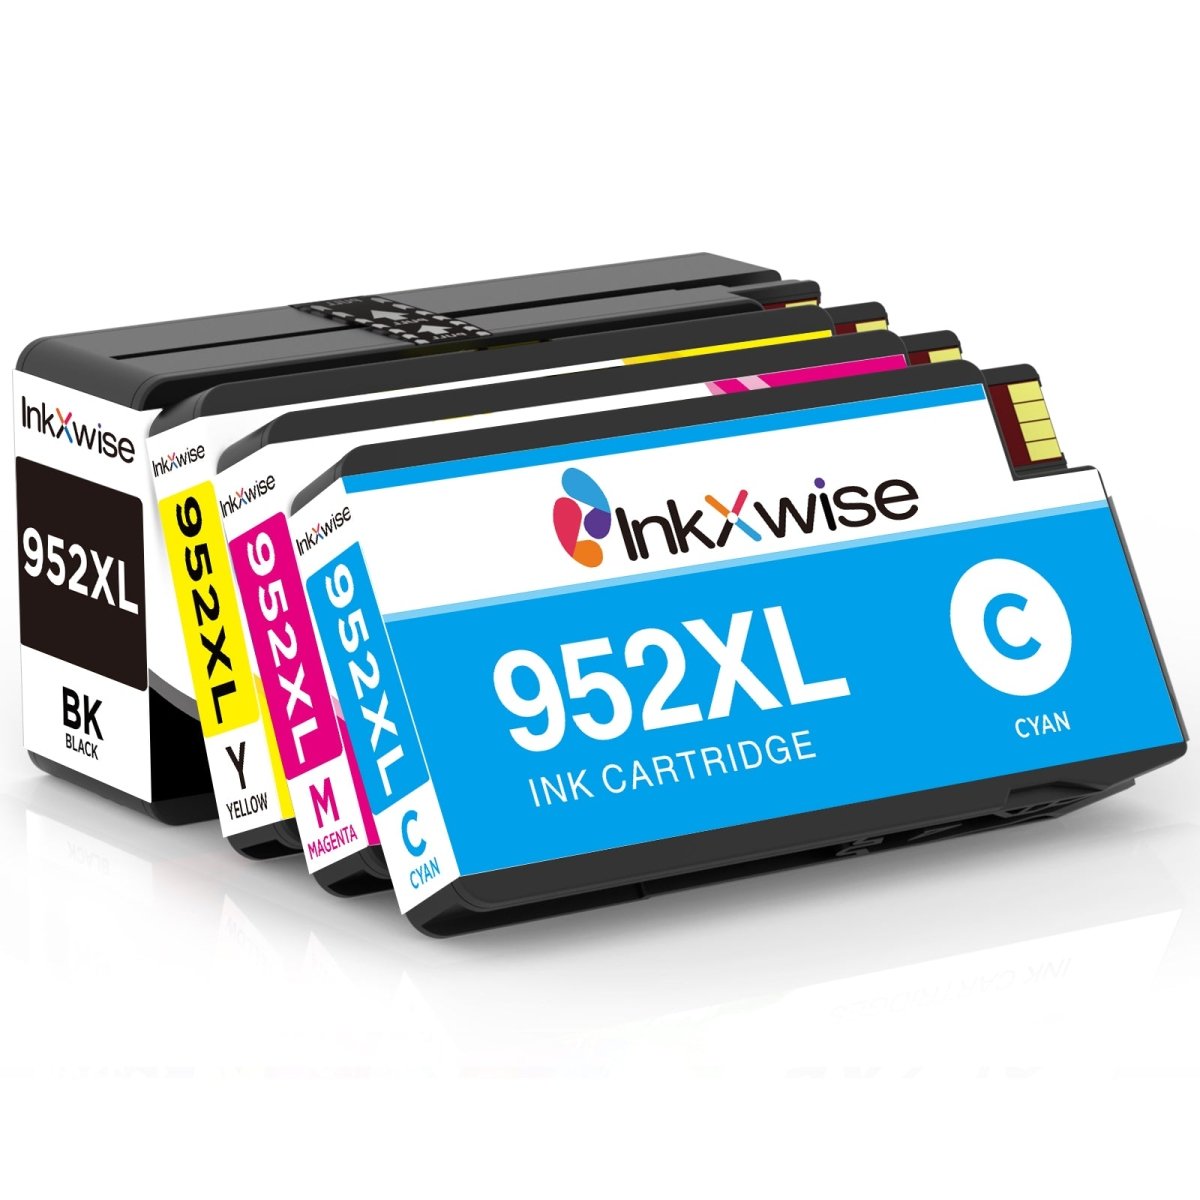 InkXwise Compatible 952XL Ink Cartridge Combo Pack use with HP 8710 Printer Ink Cartridge HP Officejet Pro 7740 8715 8725 8720 8715 Printers Ink Cartridges - Linford Office:Printer Ink & Toner Cartridge